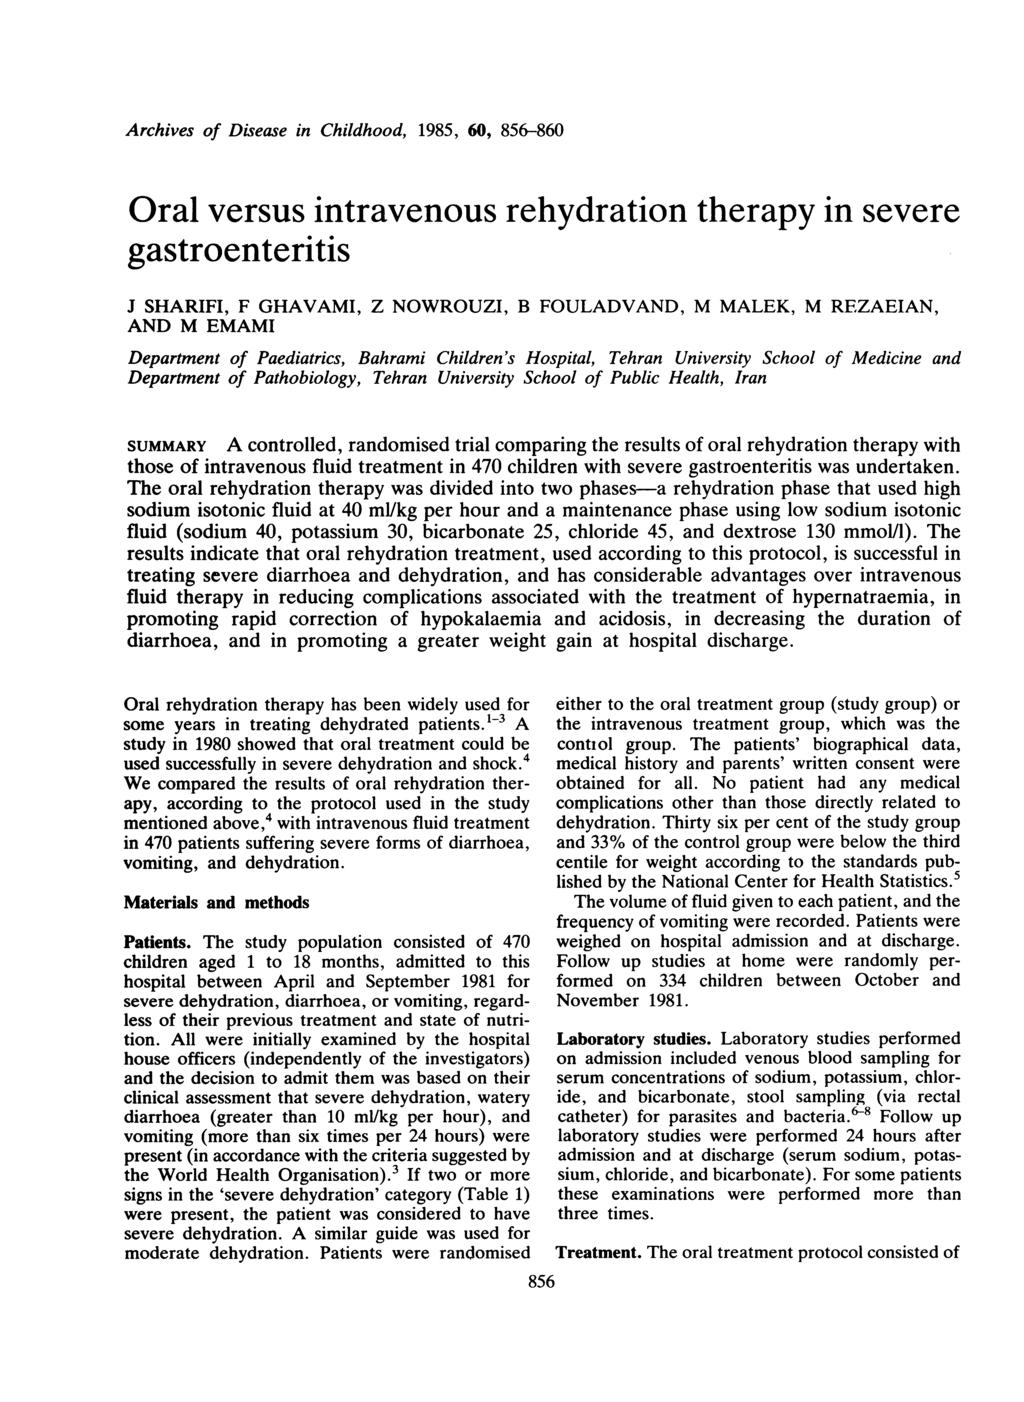 Archives of Disease in Childhood, 1985, 60, 856-860 Oral versus intravenous rehydration therapy in severe gastroenteritis J SHARIFI, F GHAVAMI, Z NOWROUZI, B FOULADVAND, M MALEK, M REZAEIAN, AND M